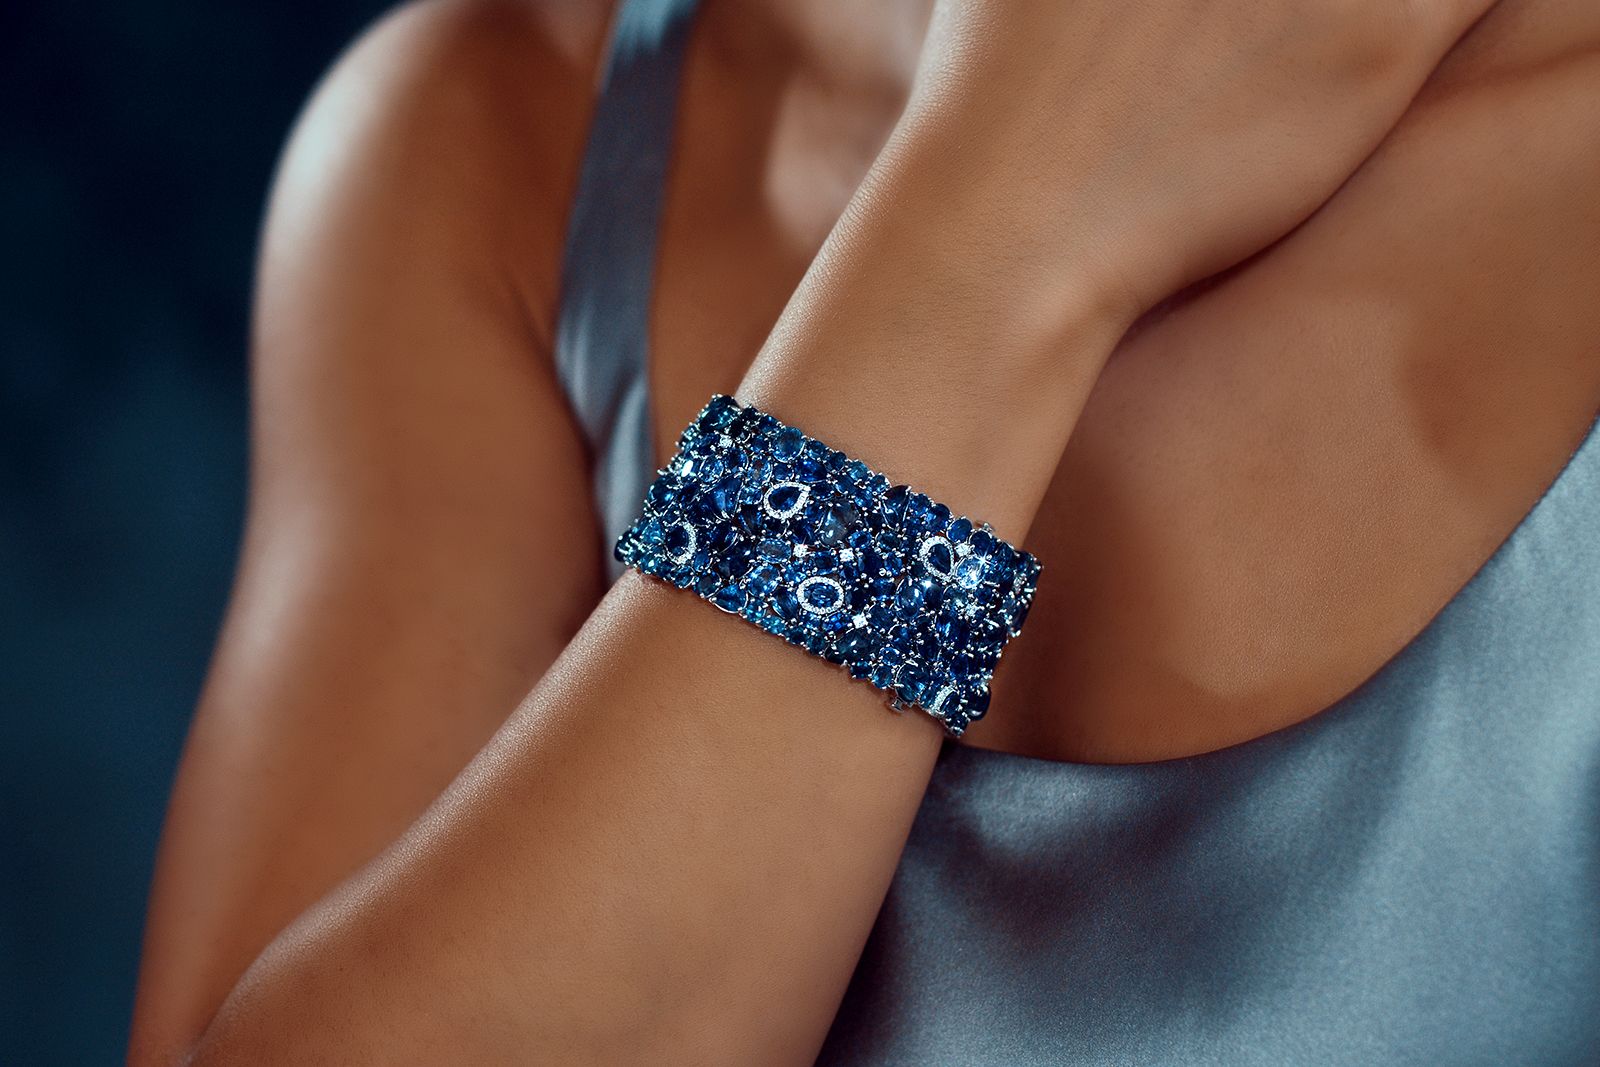 Ruchi Enchanted Evening Celeste bracelet with 123.38 carats of blue sapphires and 1.64 carats of diamonds